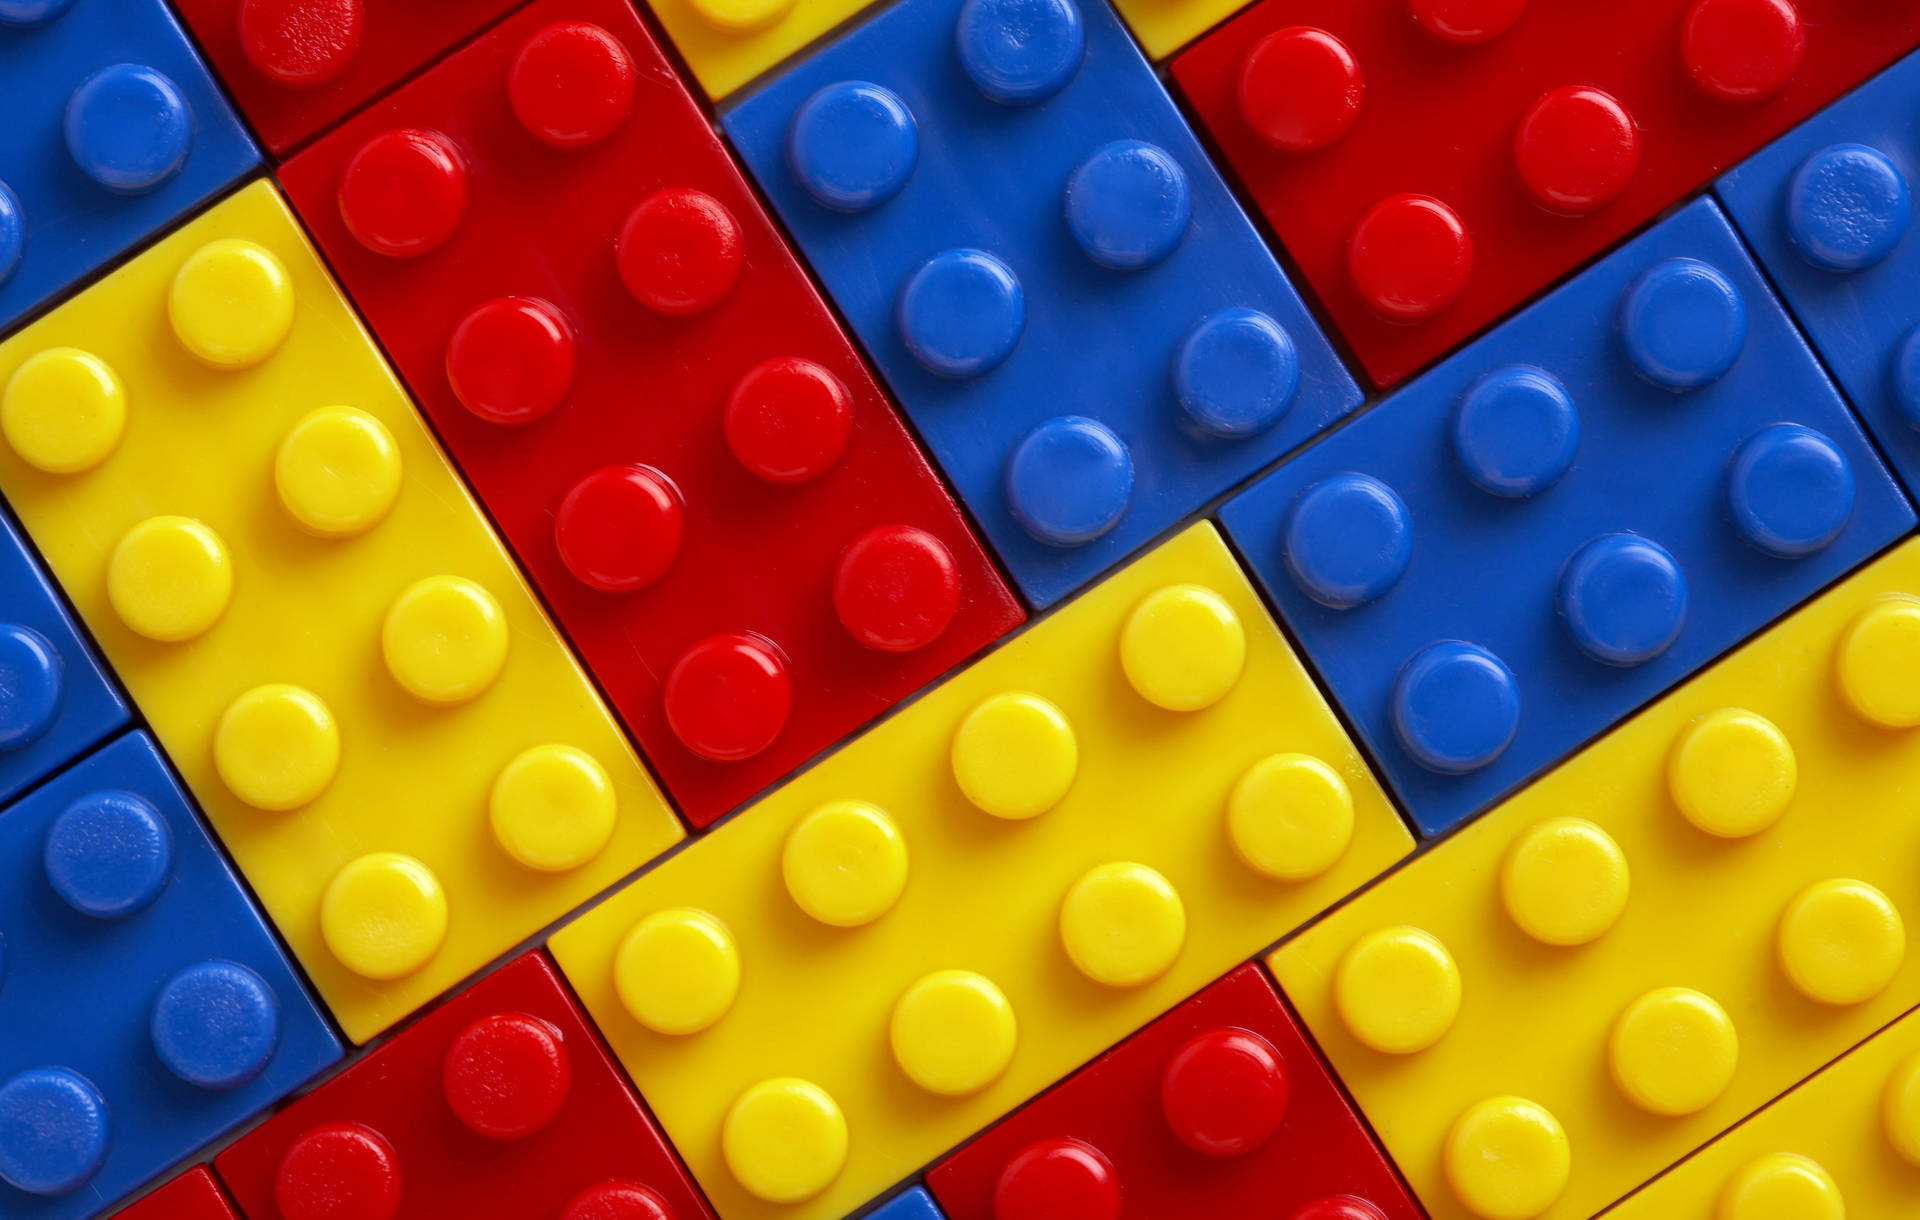 4212X2676 Lego Wallpaper and Background